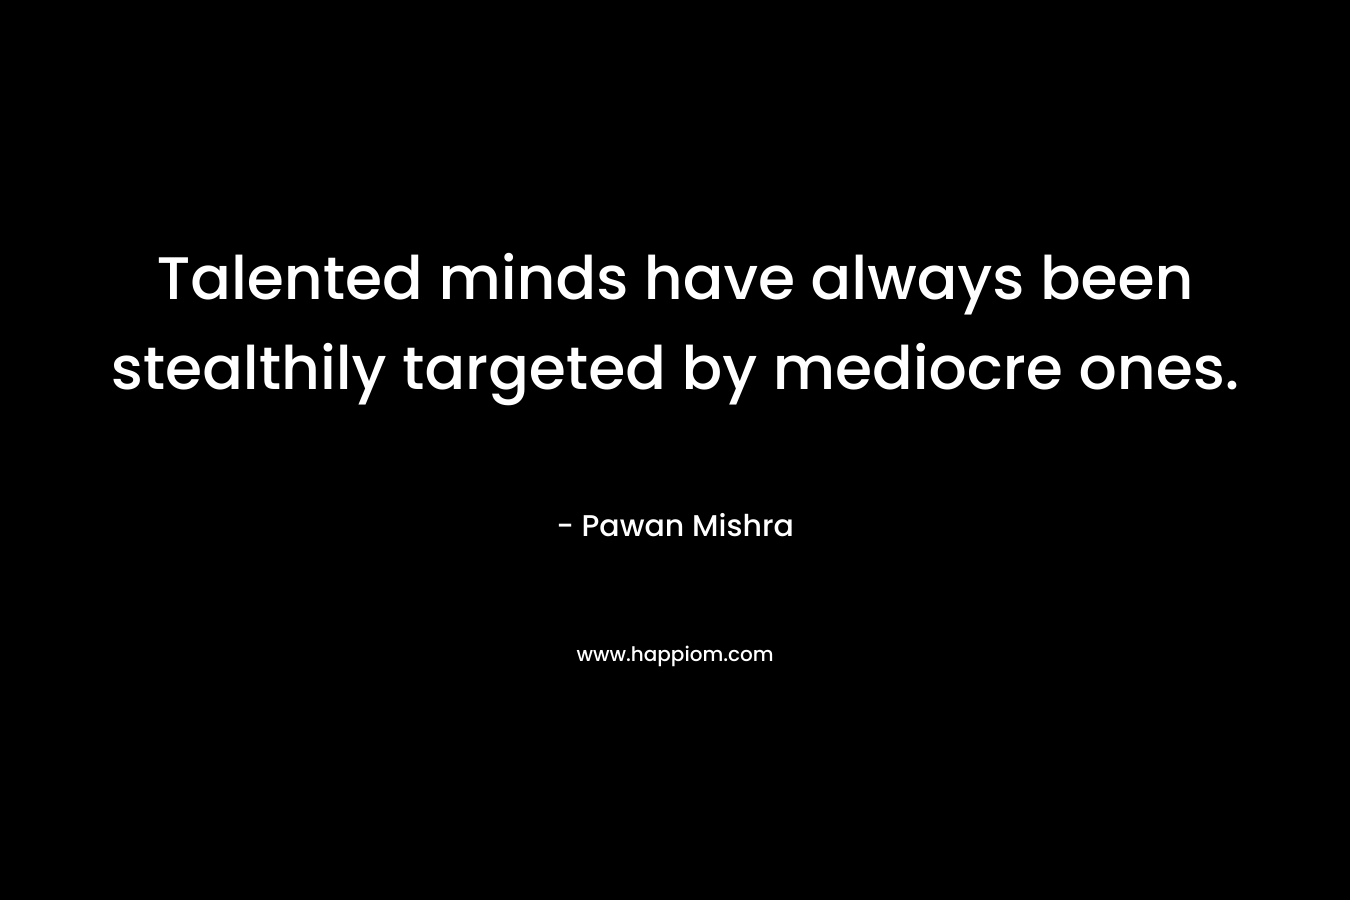 Talented minds have always been stealthily targeted by mediocre ones.